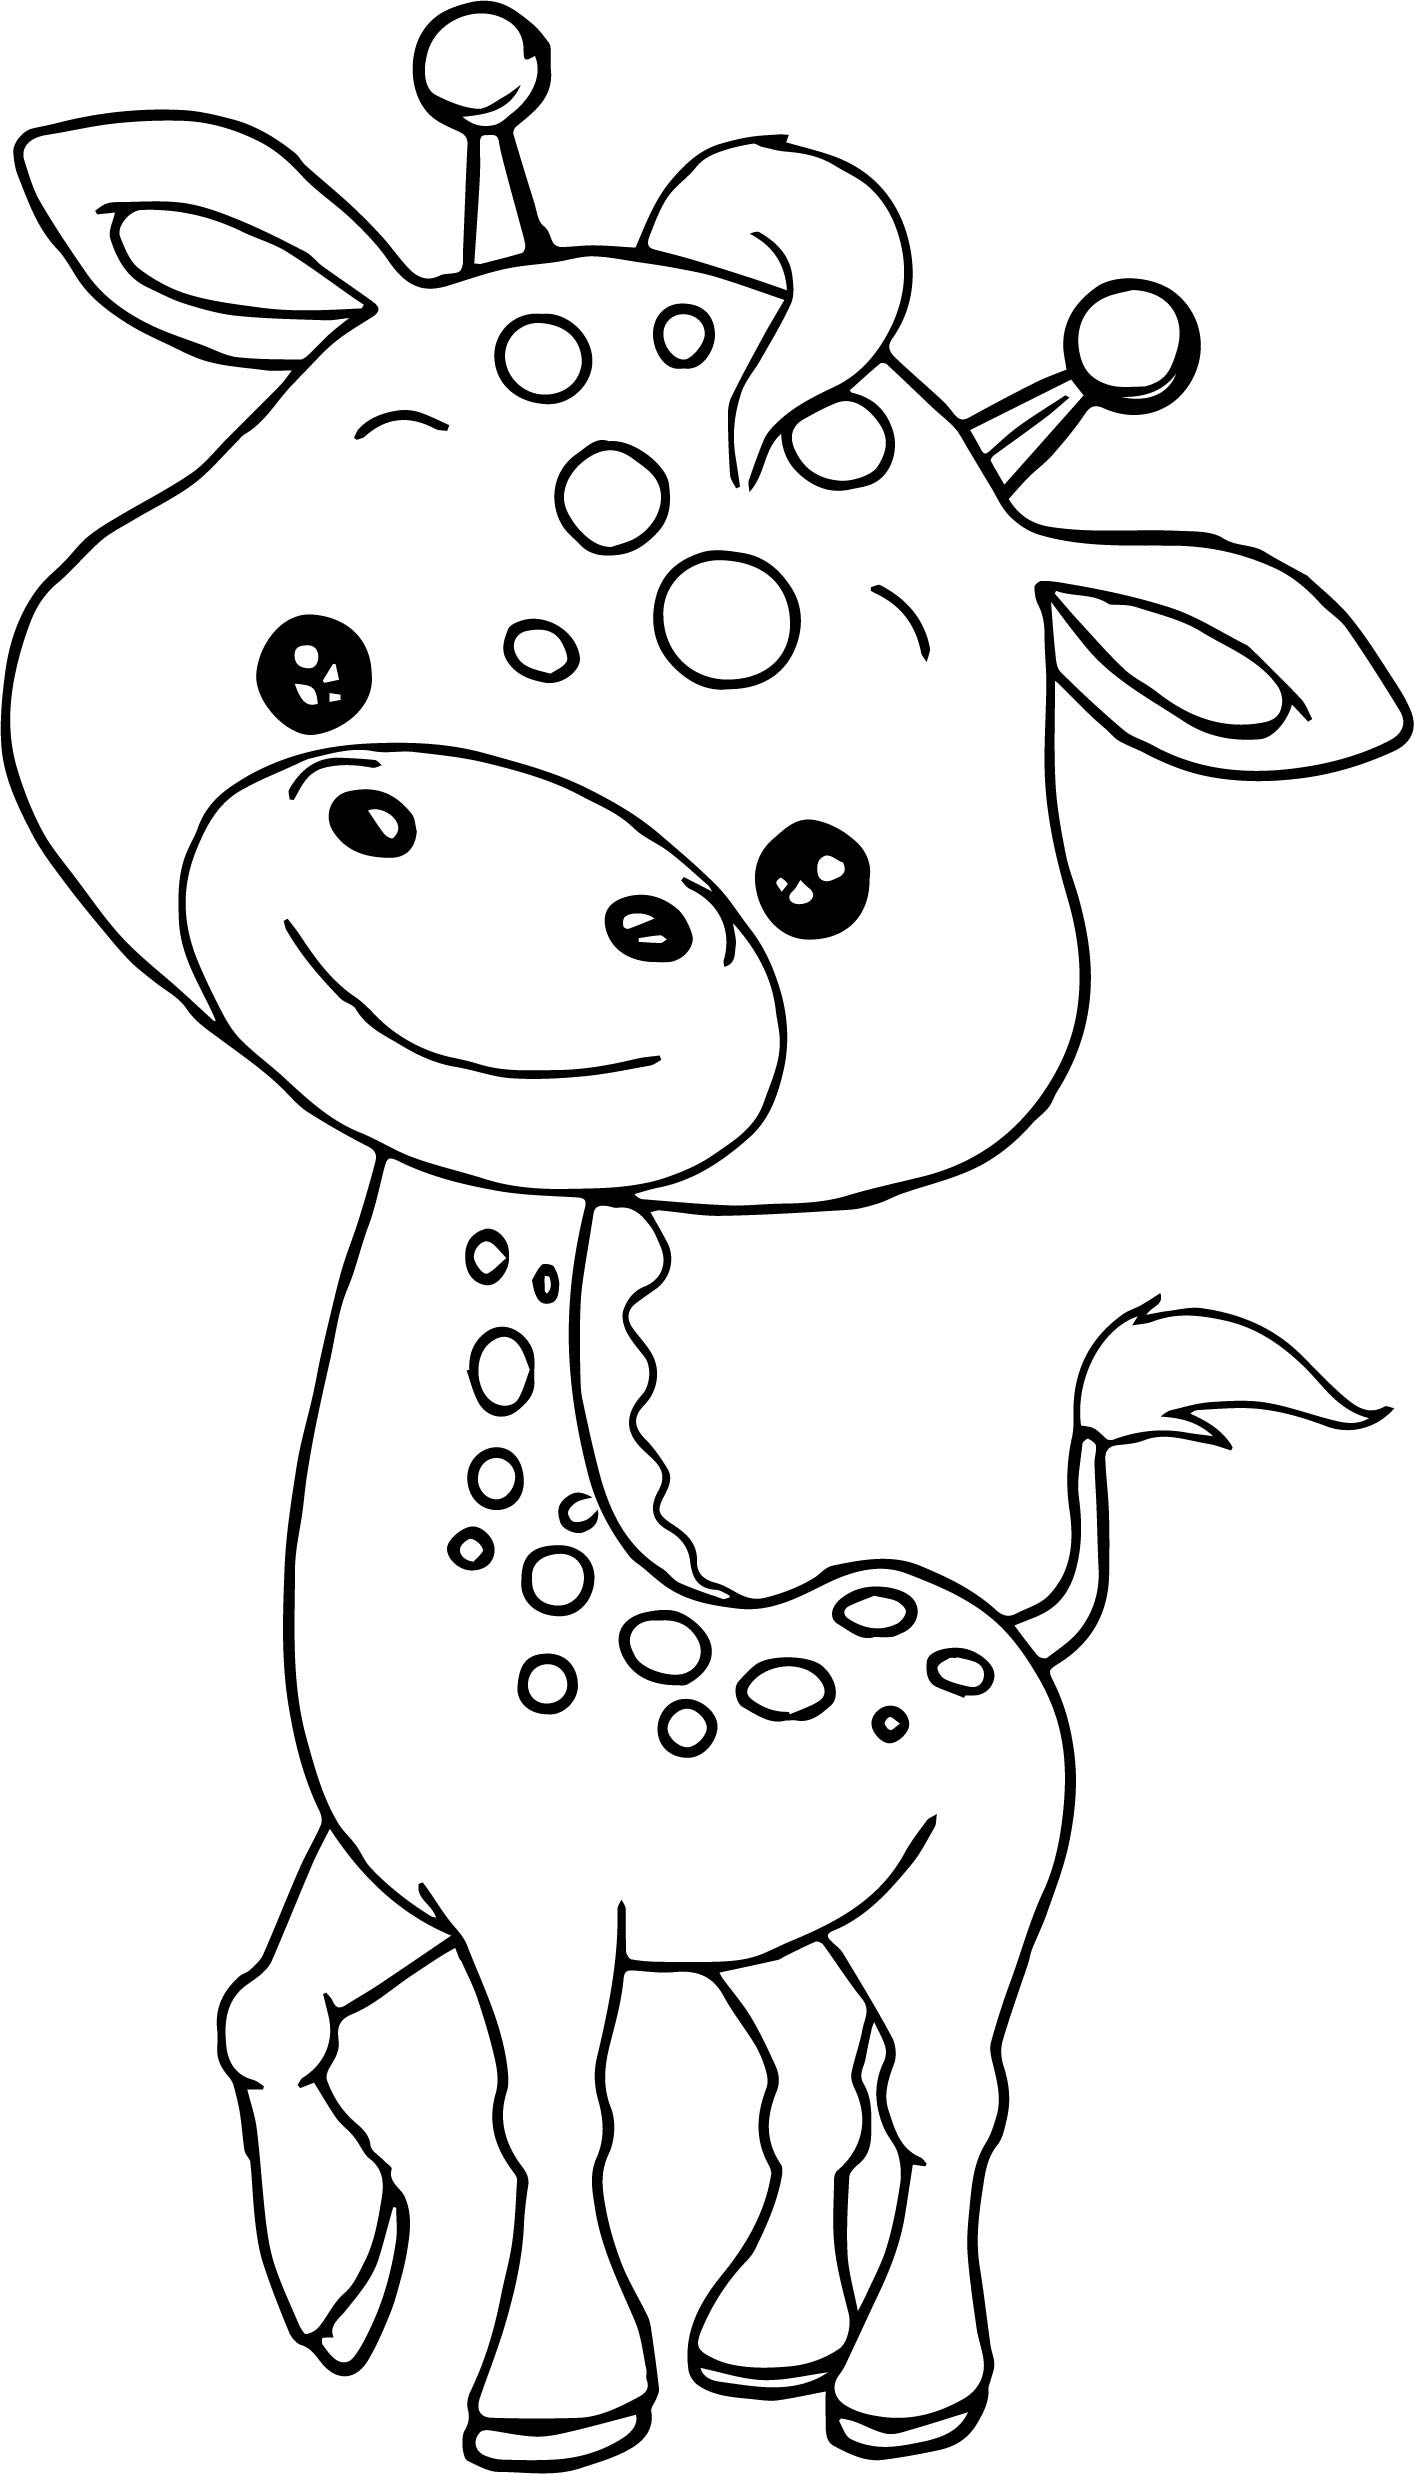 Baby Animal Coloring Page
 Baby Jungle Free Animal Coloring Page